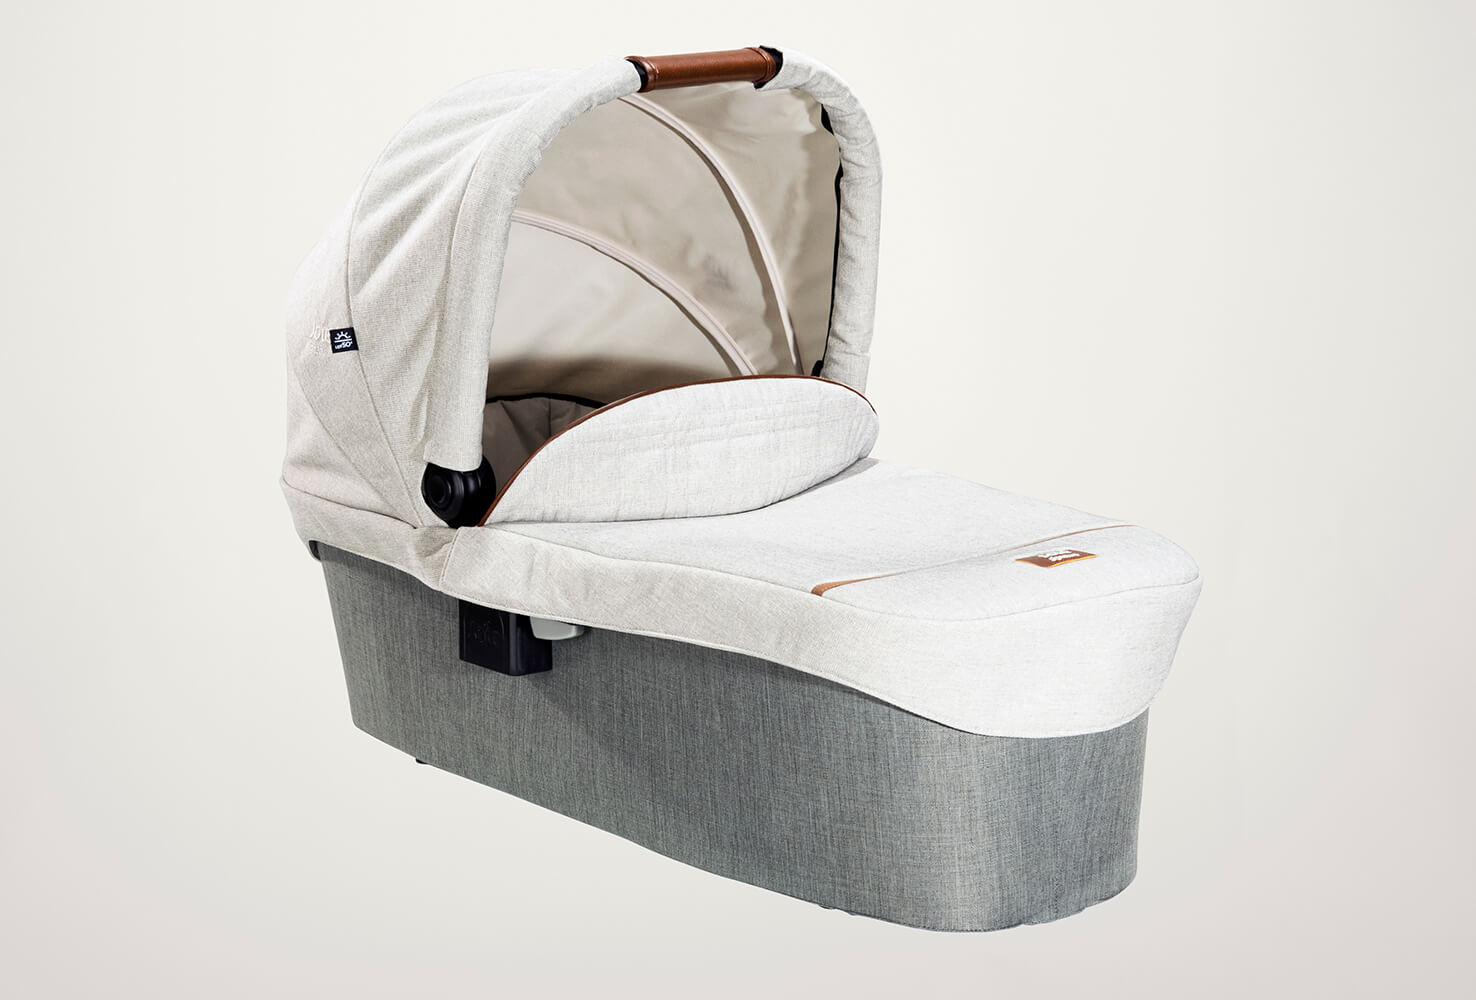 Joie Signature ramble carry cot in light gray at a right angle with hood raised.
